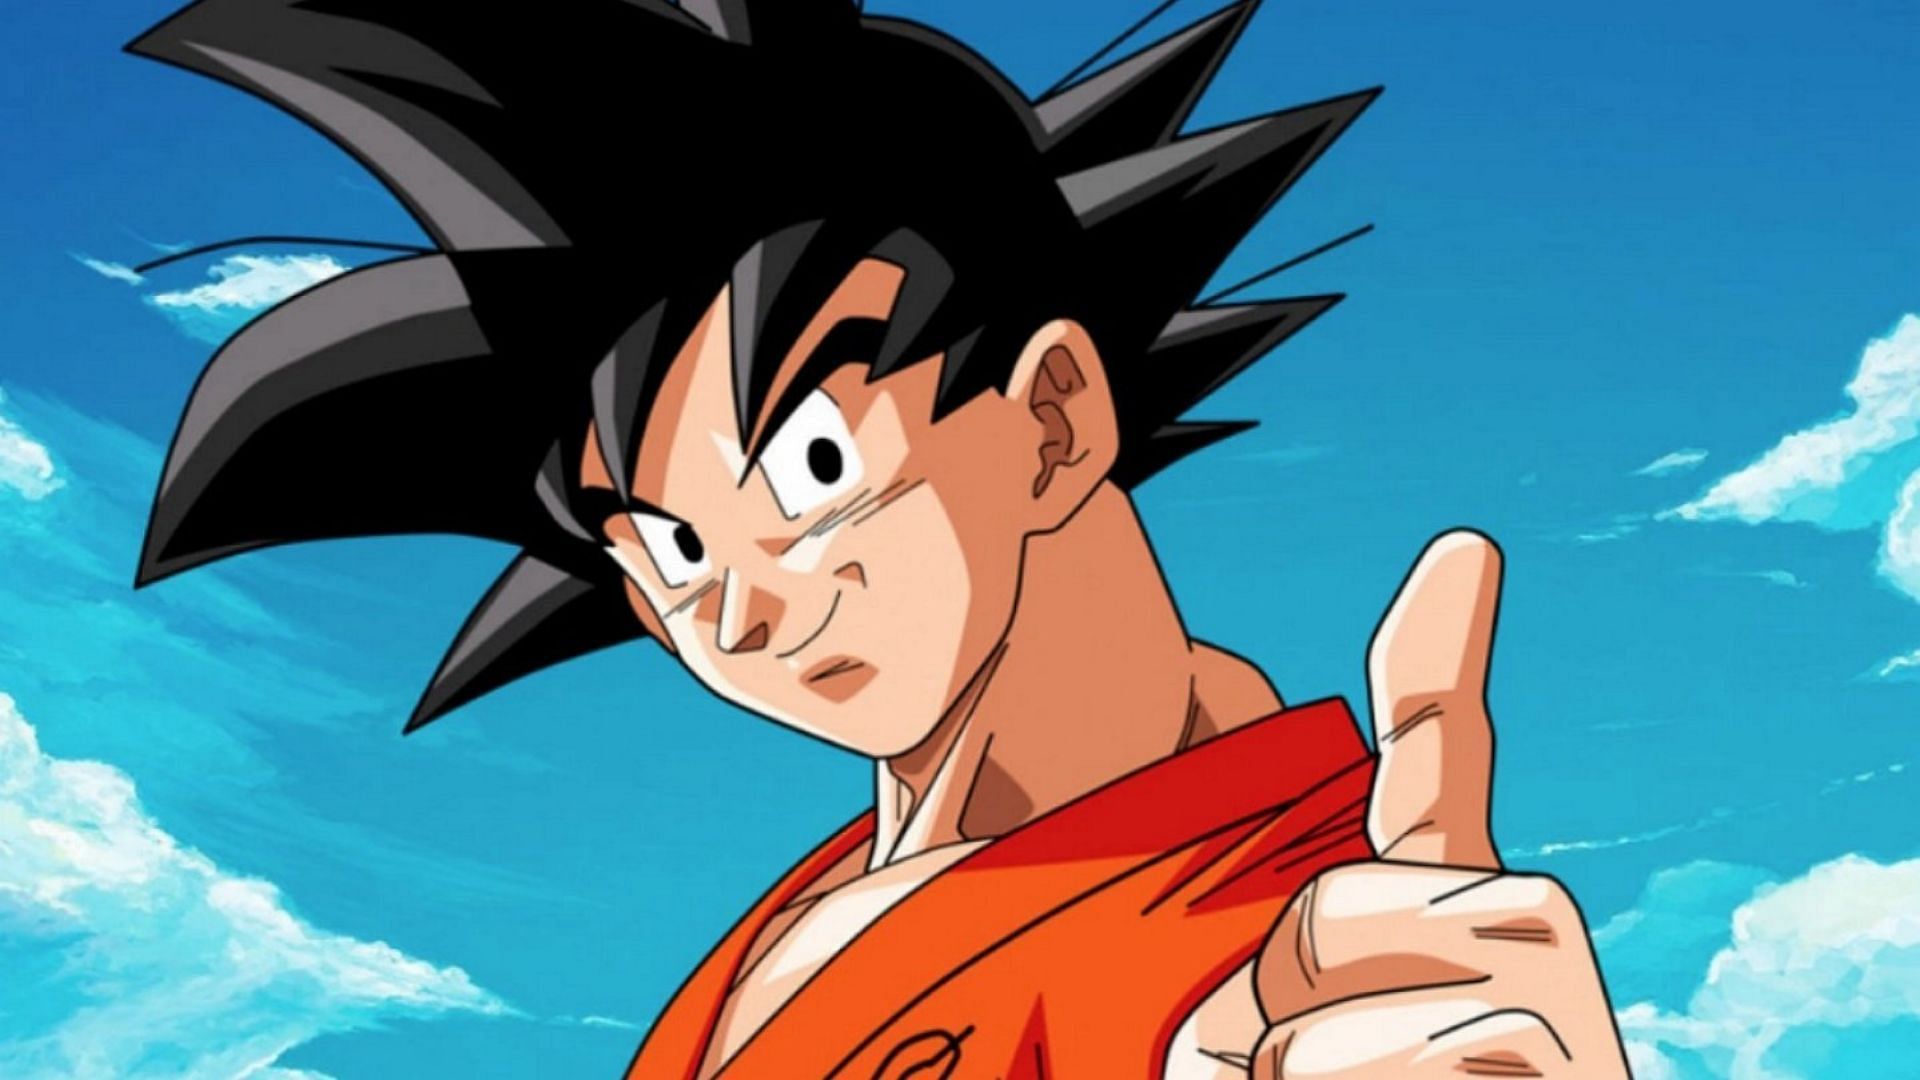 10 Anime Heroes Who Would Crush Goku in a Fight